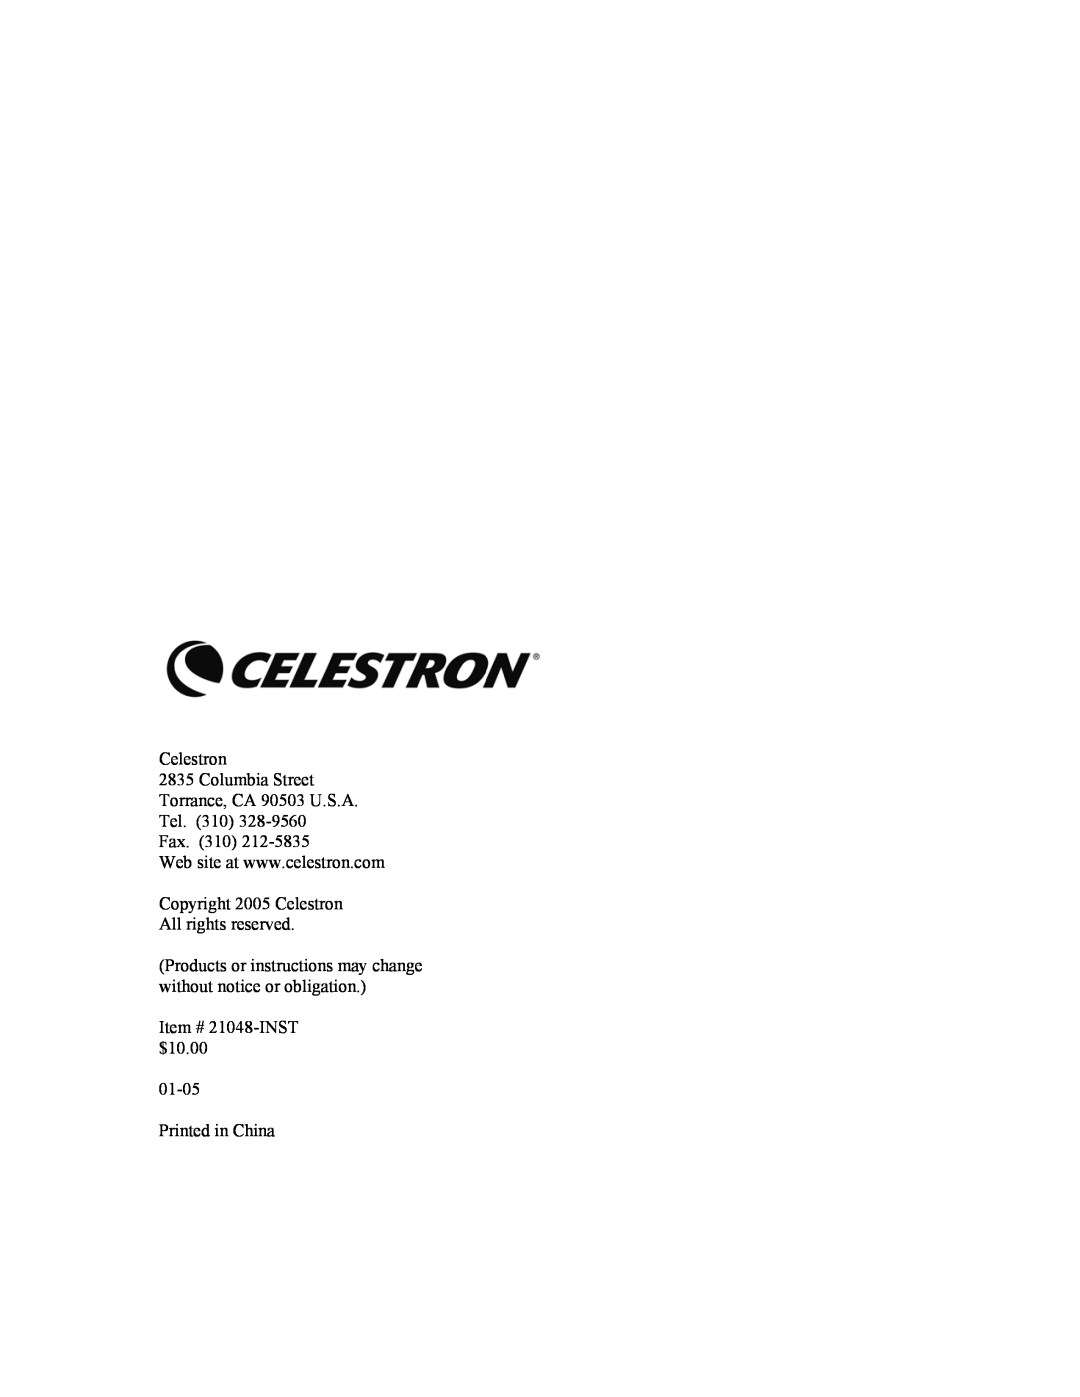 Celestron 80 manual Copyright 2005 Celestron All rights reserved 